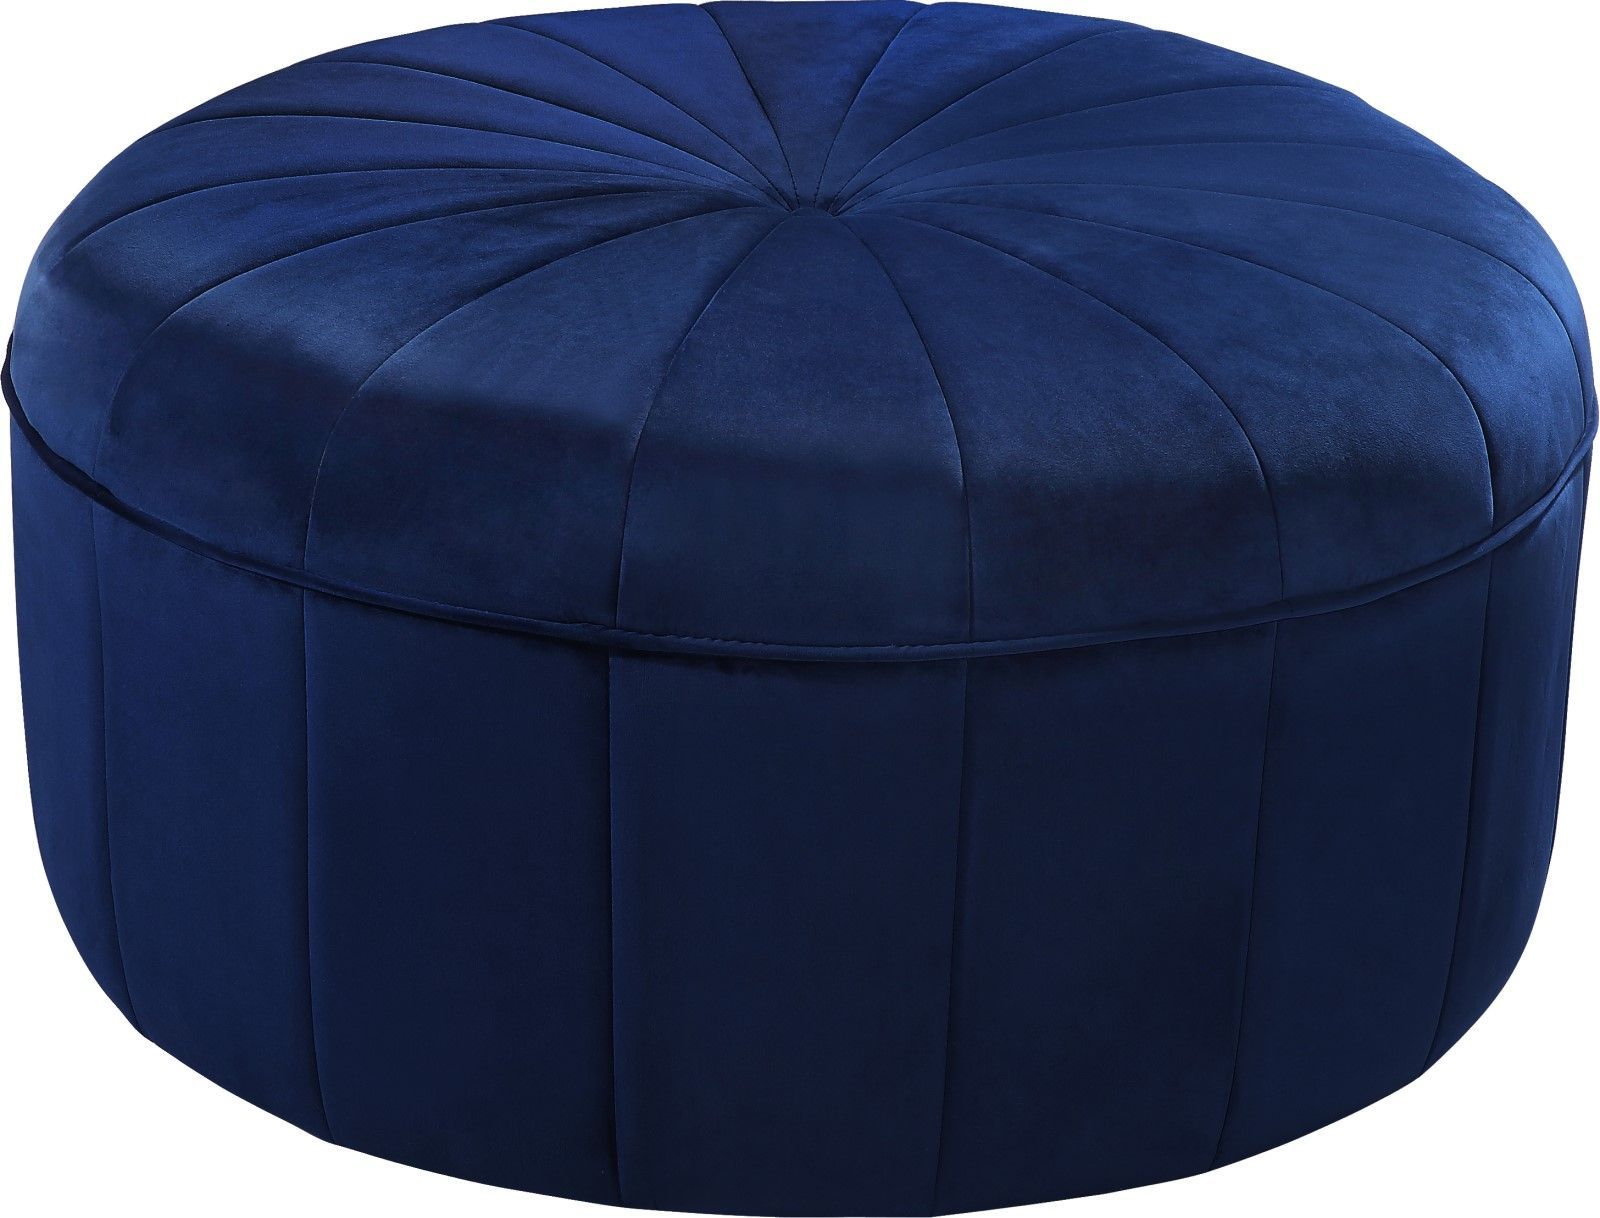 Thane Contemporary Round Ottoman Bench In Navy Blue Channel Tufted Velvet Regarding Blue Fabric Tufted Surfboard Ottomans (View 4 of 20)